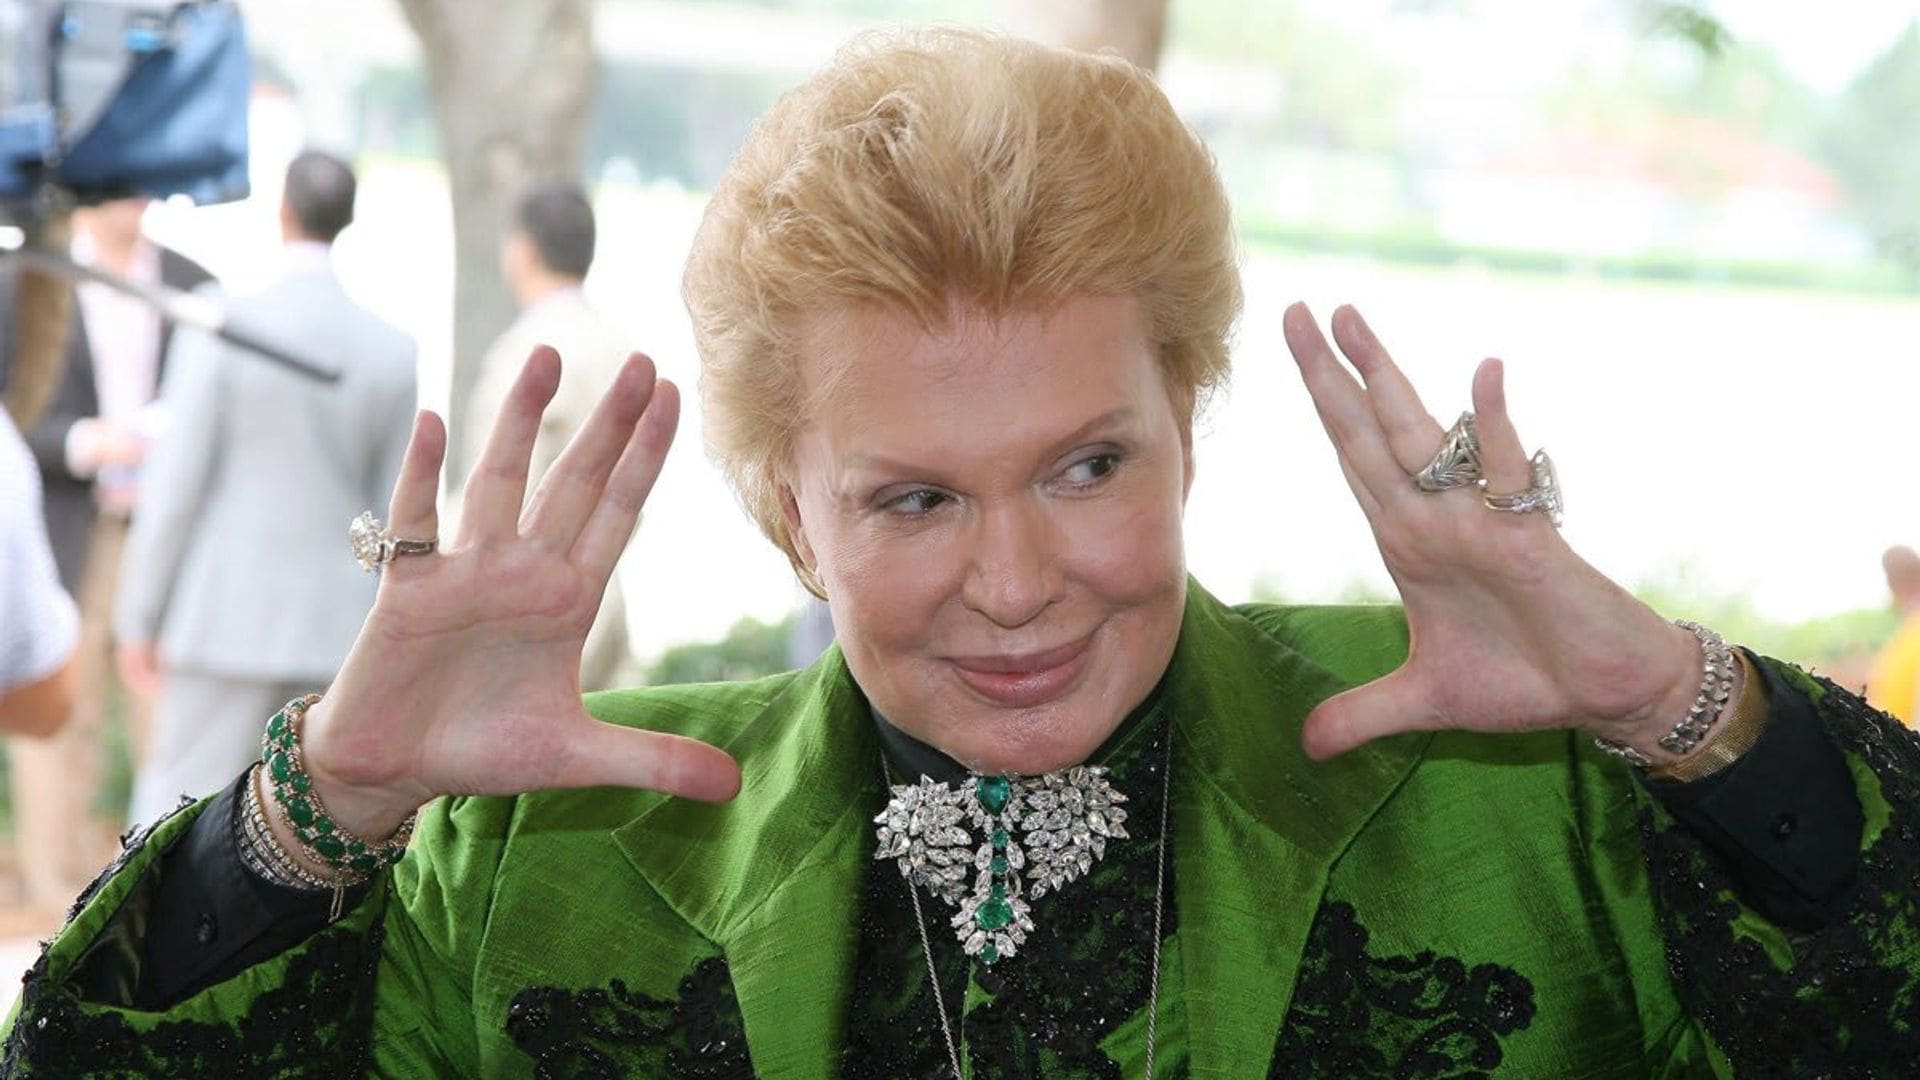 Walter Mercado’s collections, jeweles, capes and more will soon be auctioned